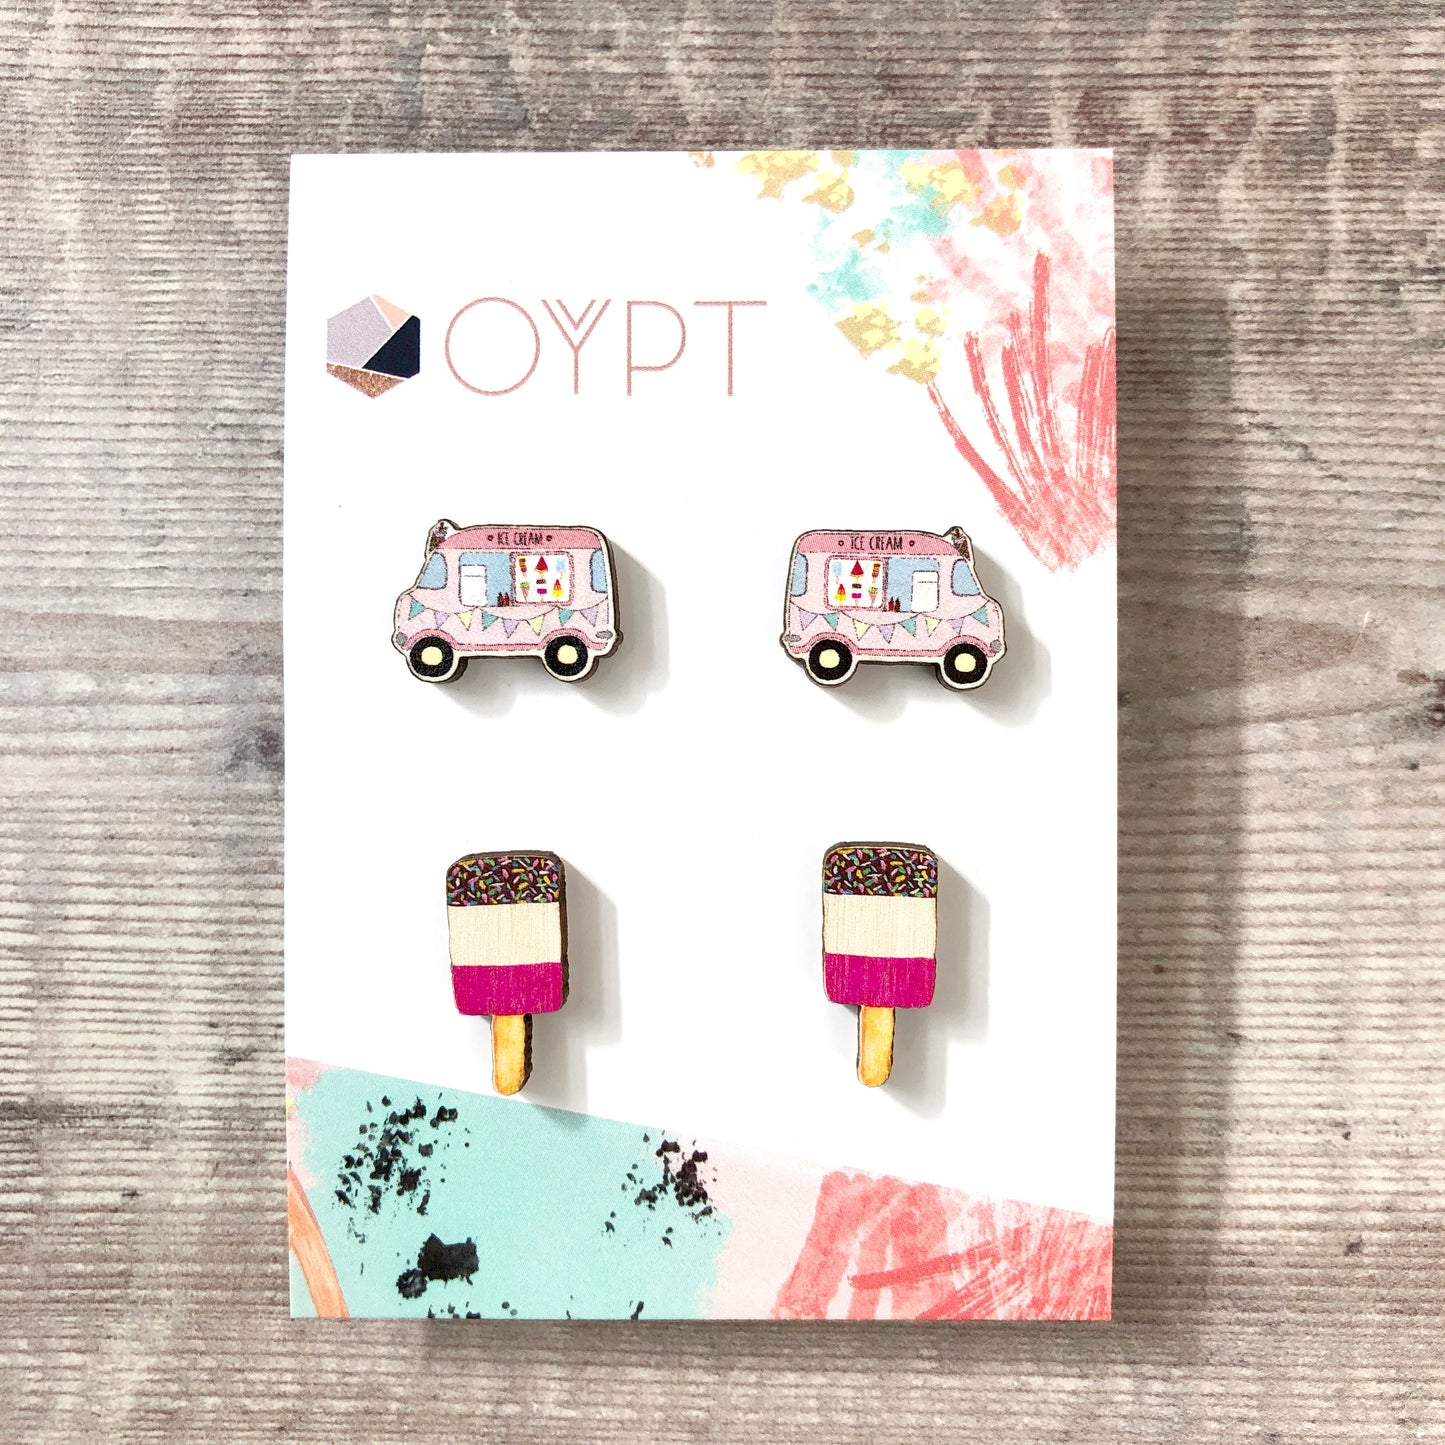 Ice cream stud earring set - choose your own flavours!